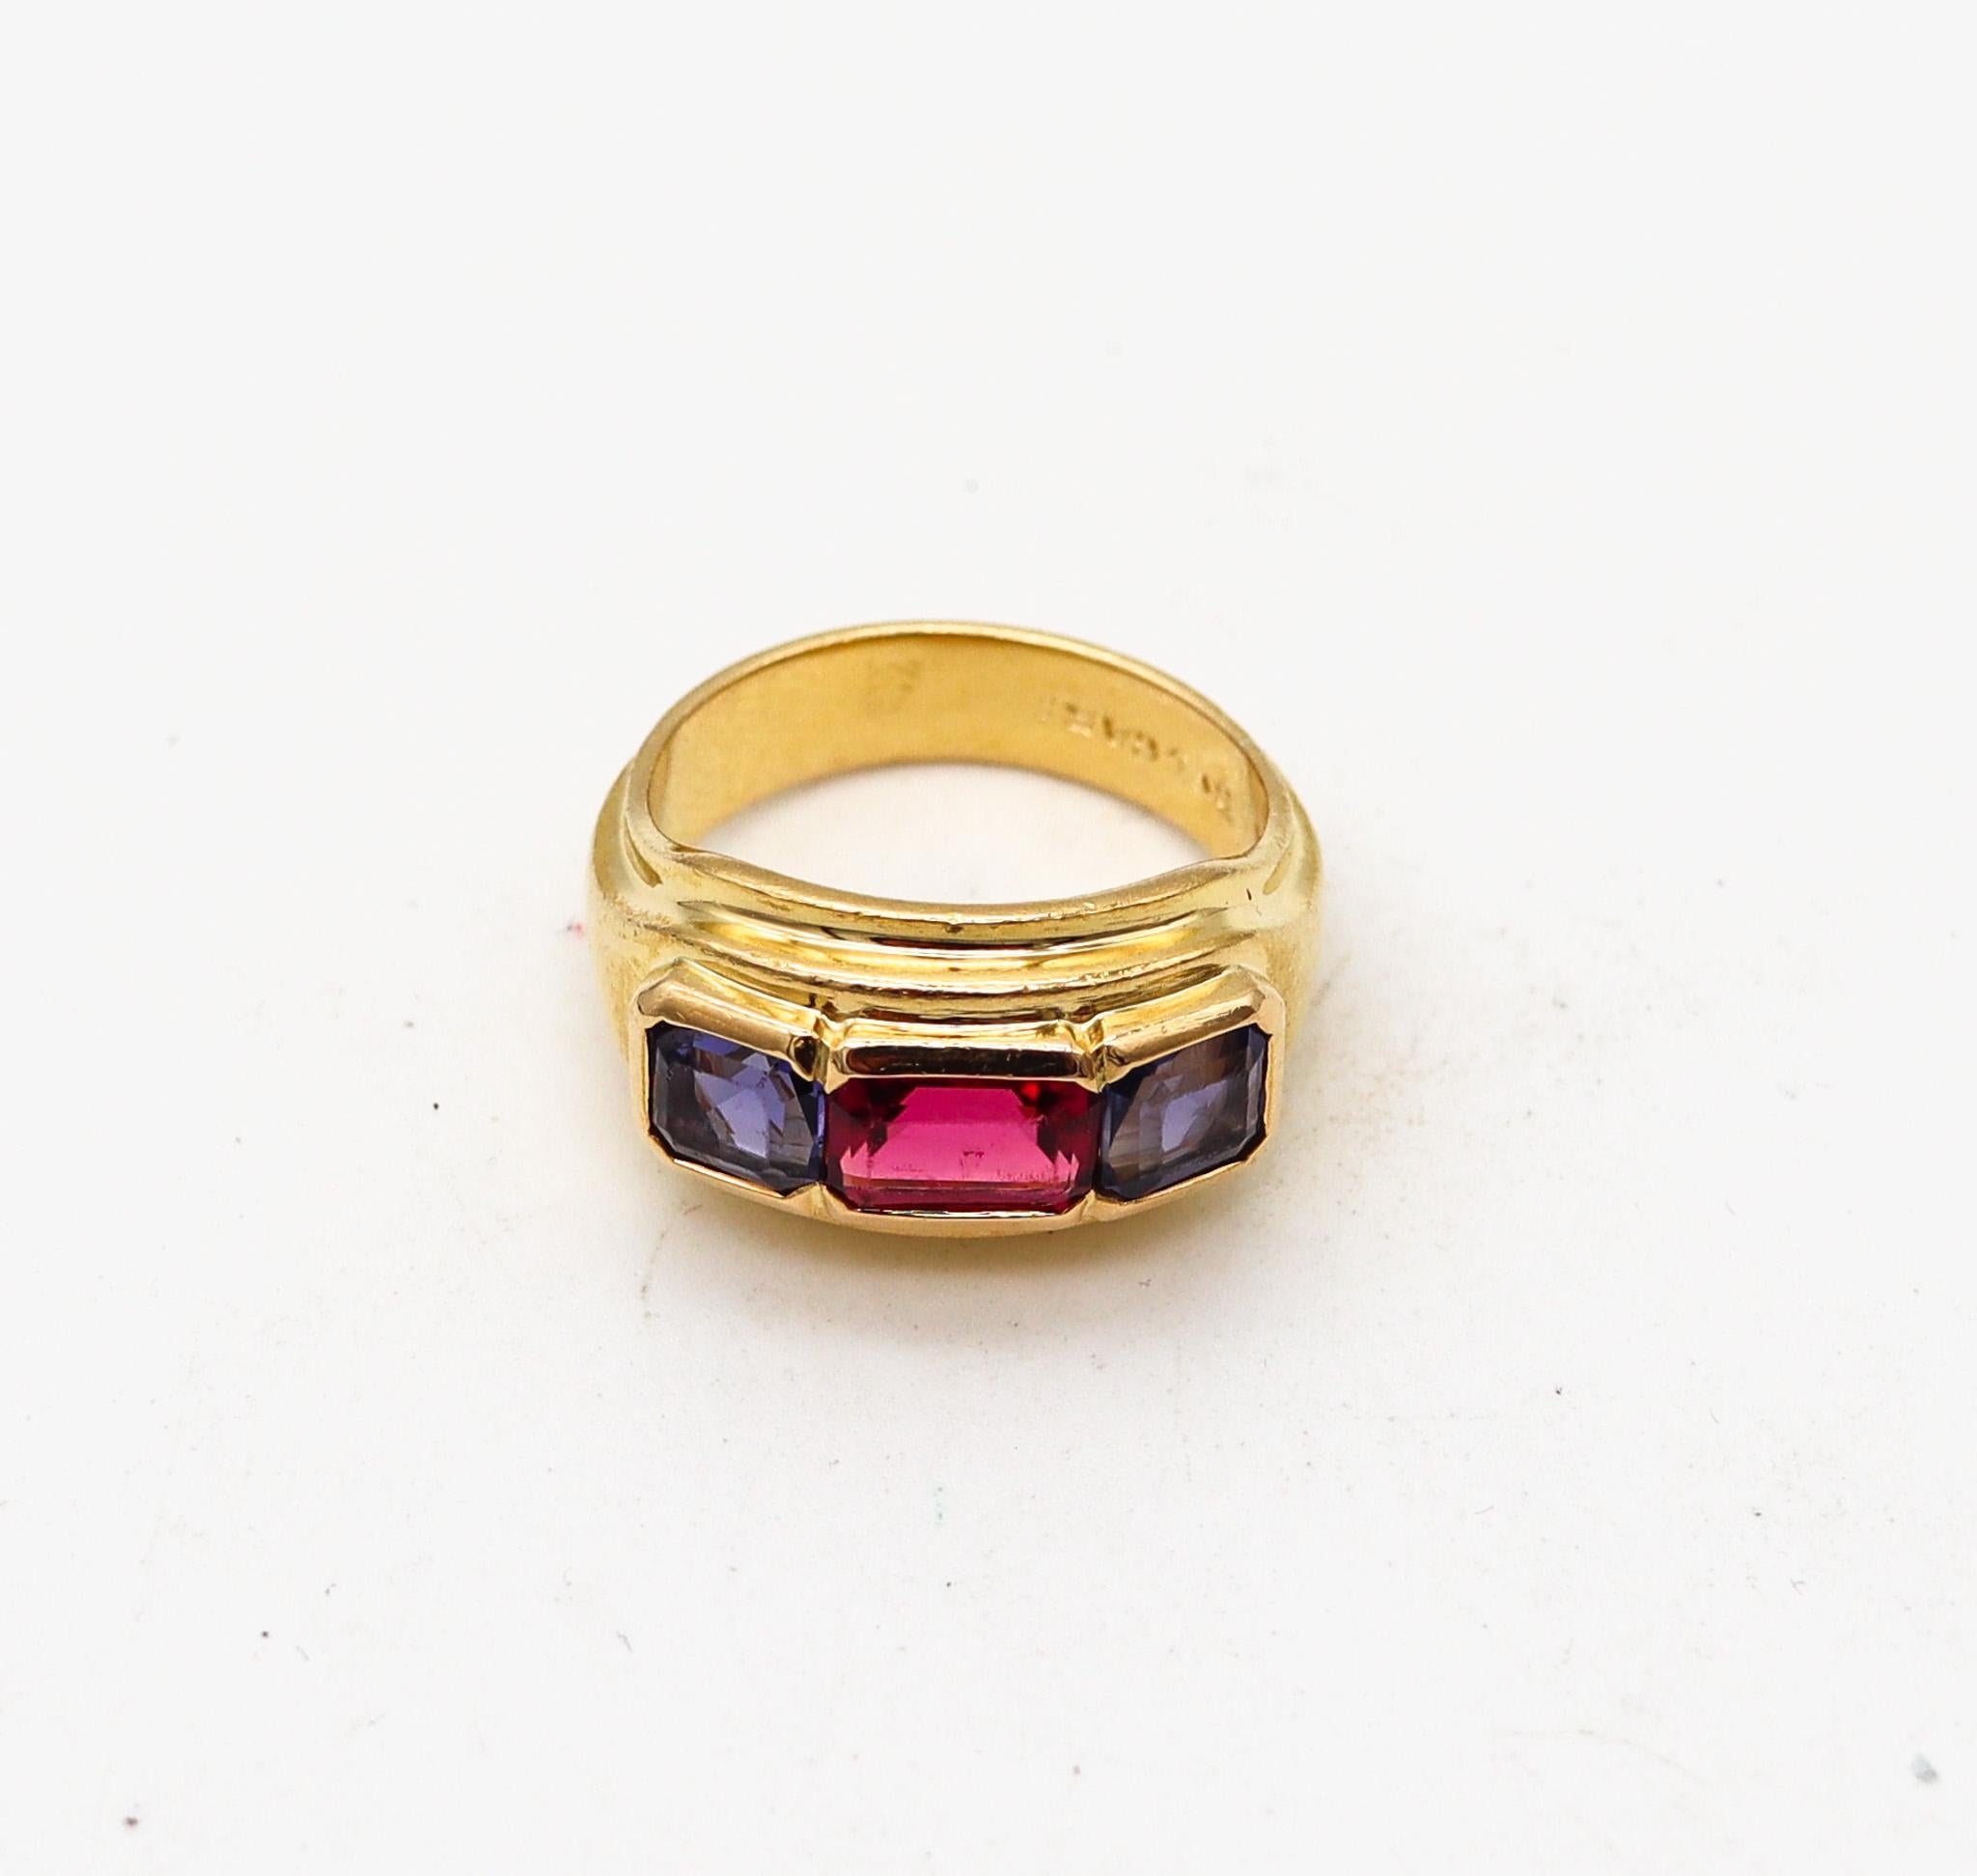 Bvlgari France Three Gems Ring In 18Kt Gold With 2.18 Ctw In Tourmaline & Iolite In Excellent Condition For Sale In Miami, FL